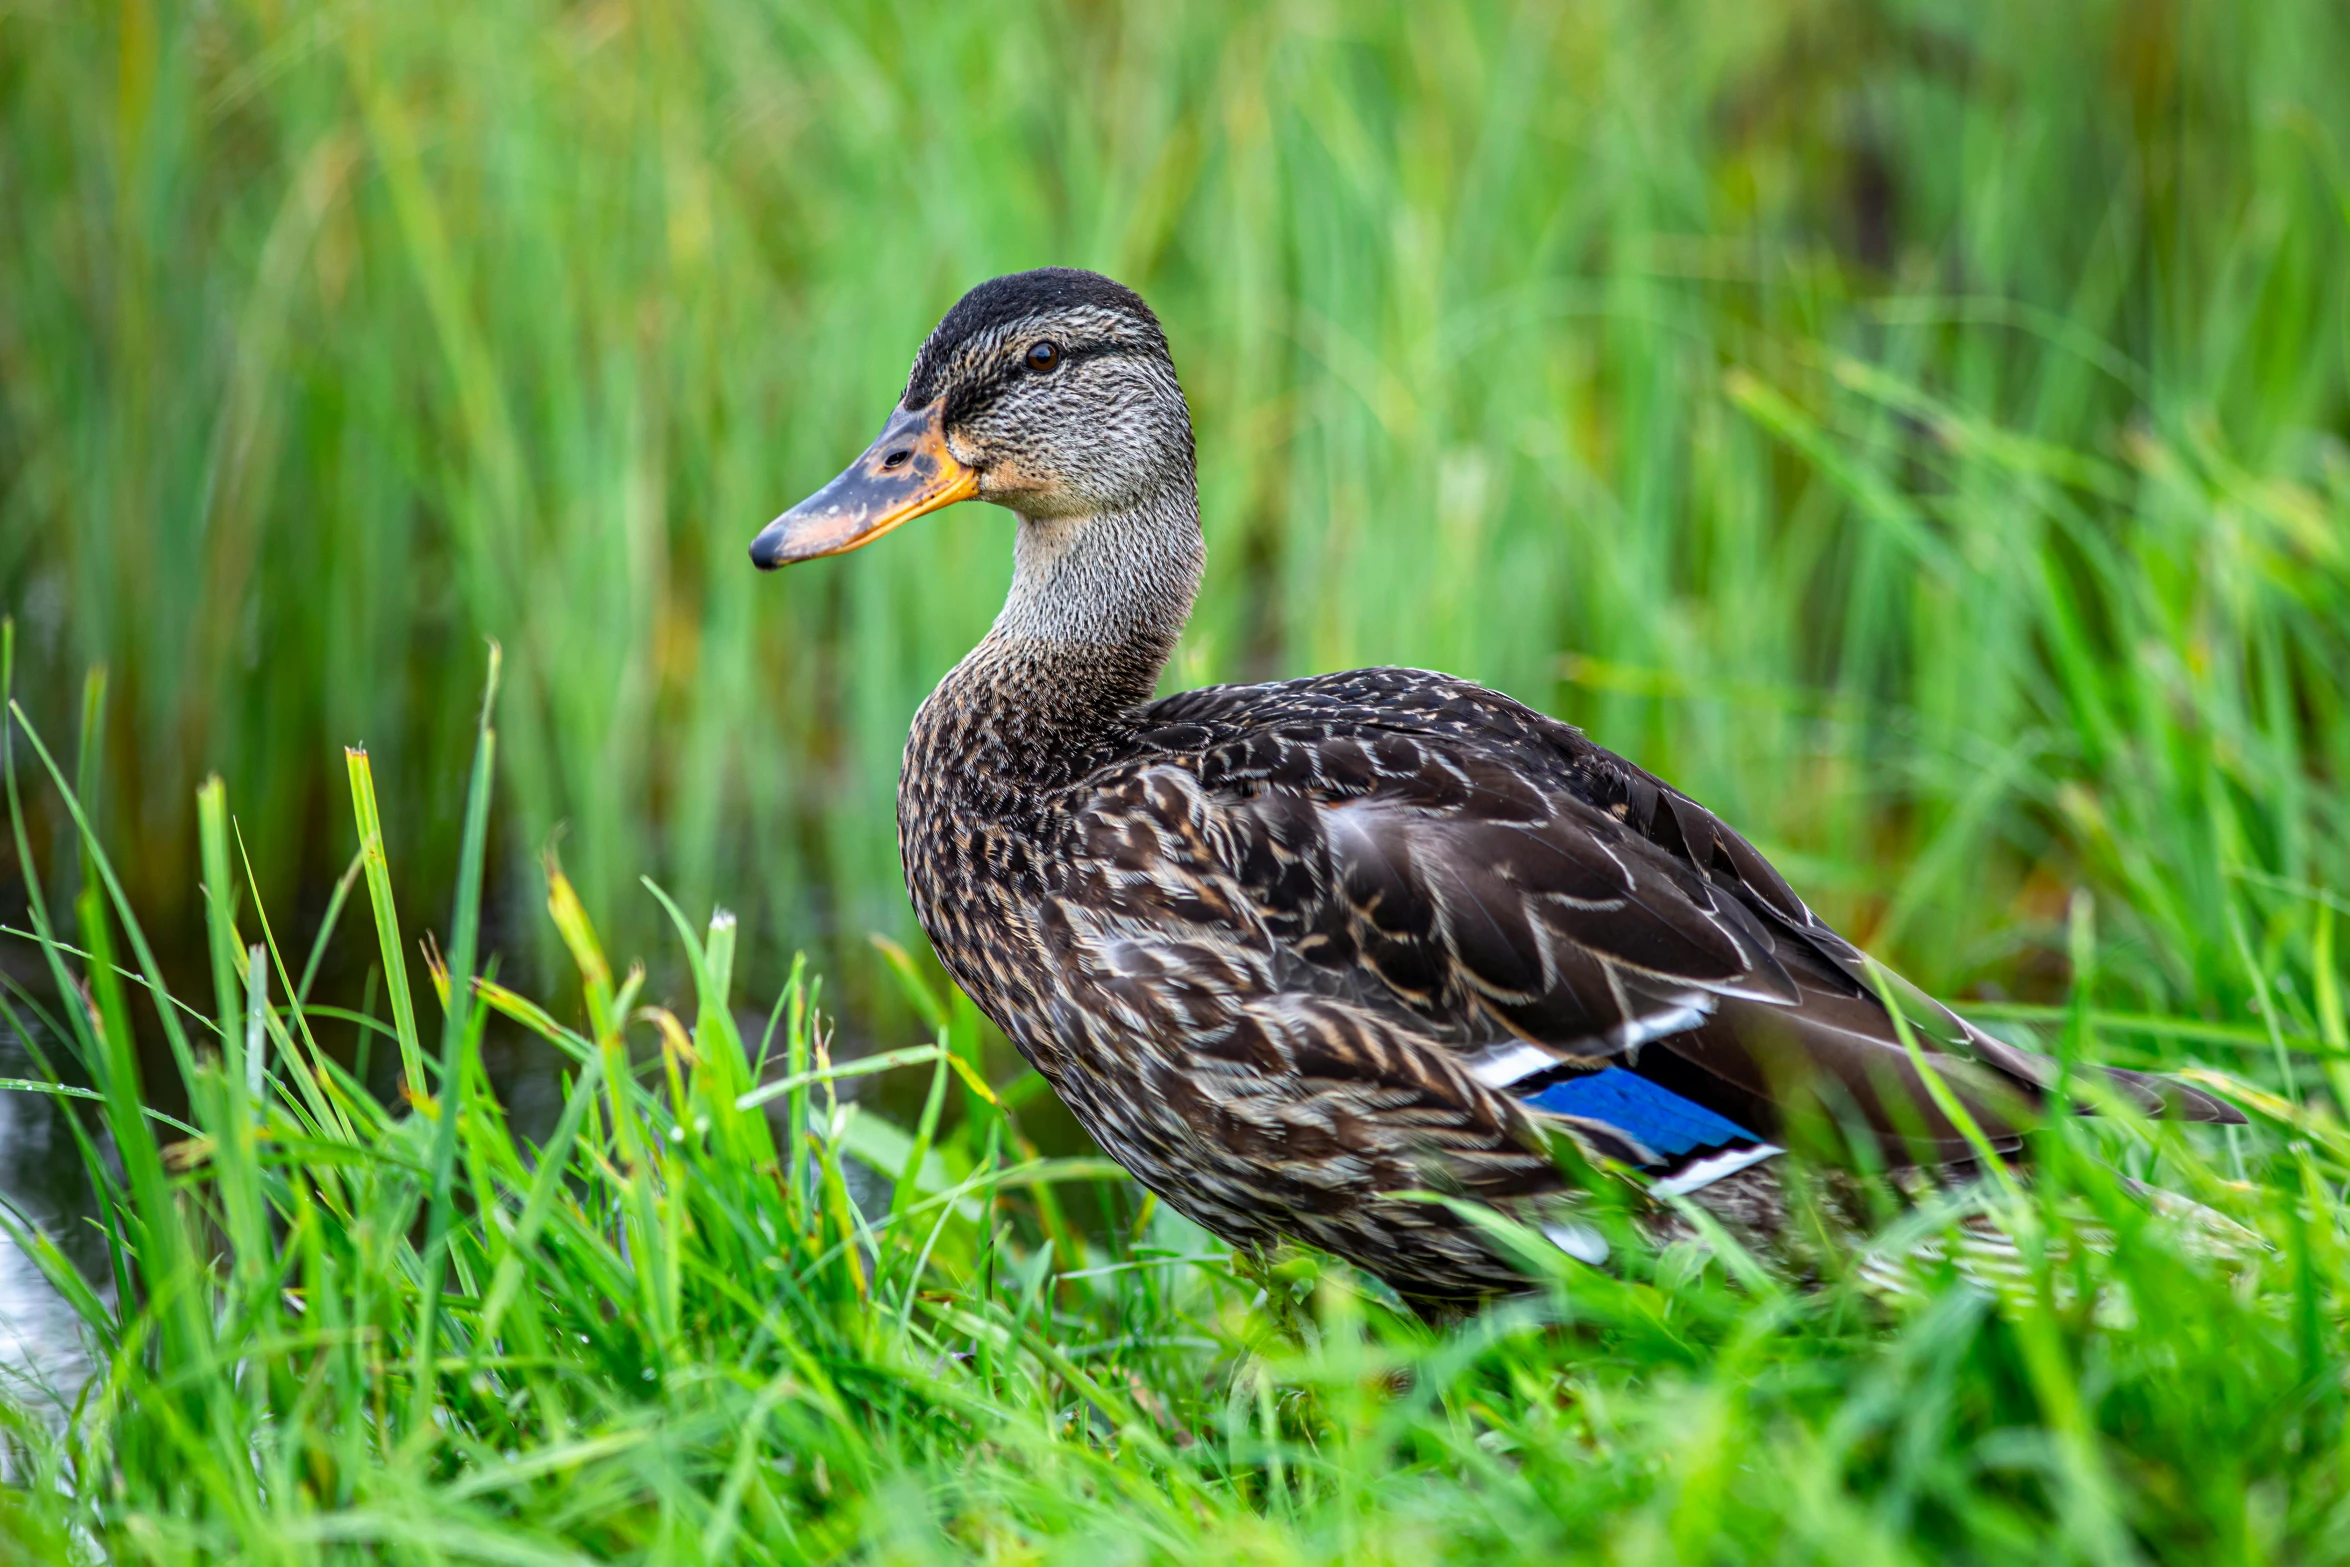 a duck in a grassy area with its head resting on soing